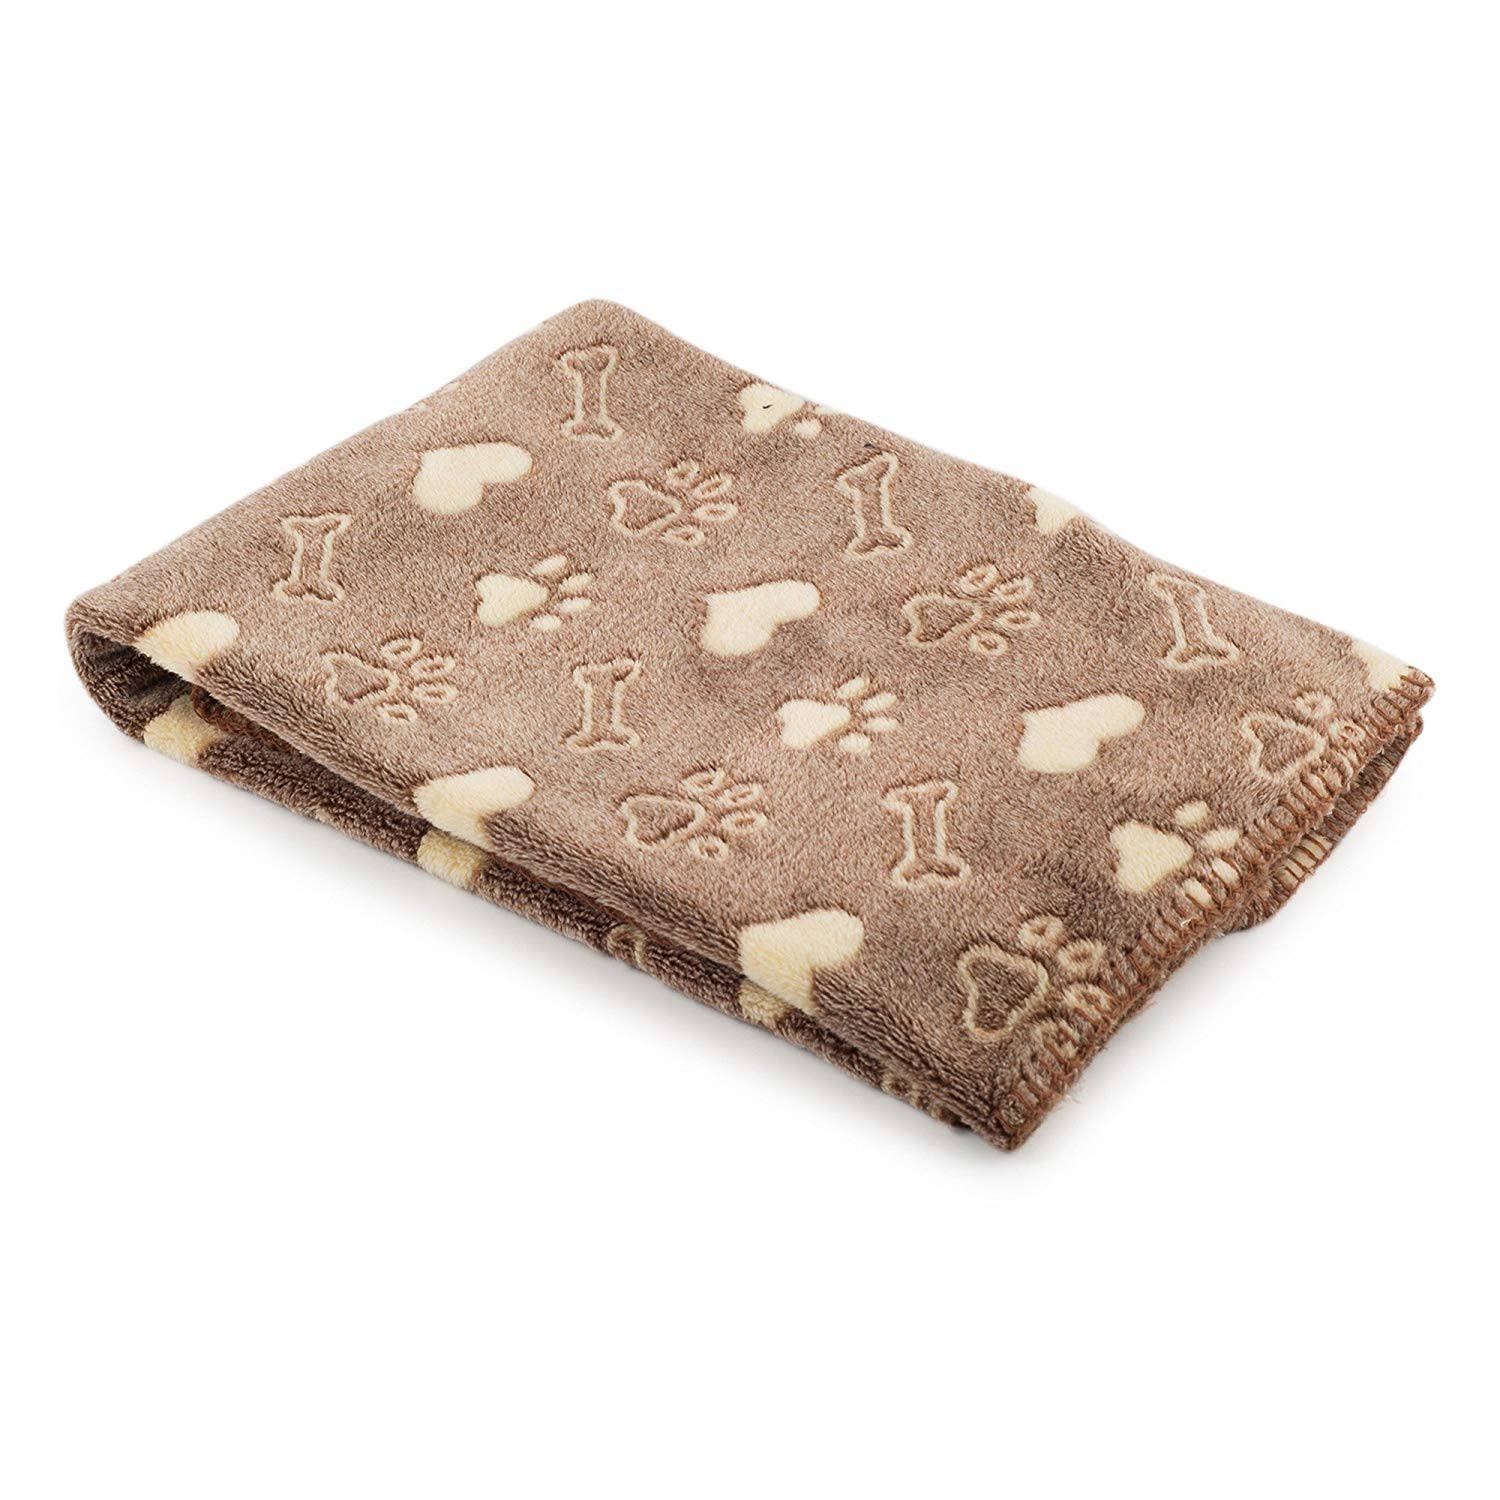 Ancol Sleepy Paws Dog and Cat Comfort Blanket - Brown, 74cm x 74cm